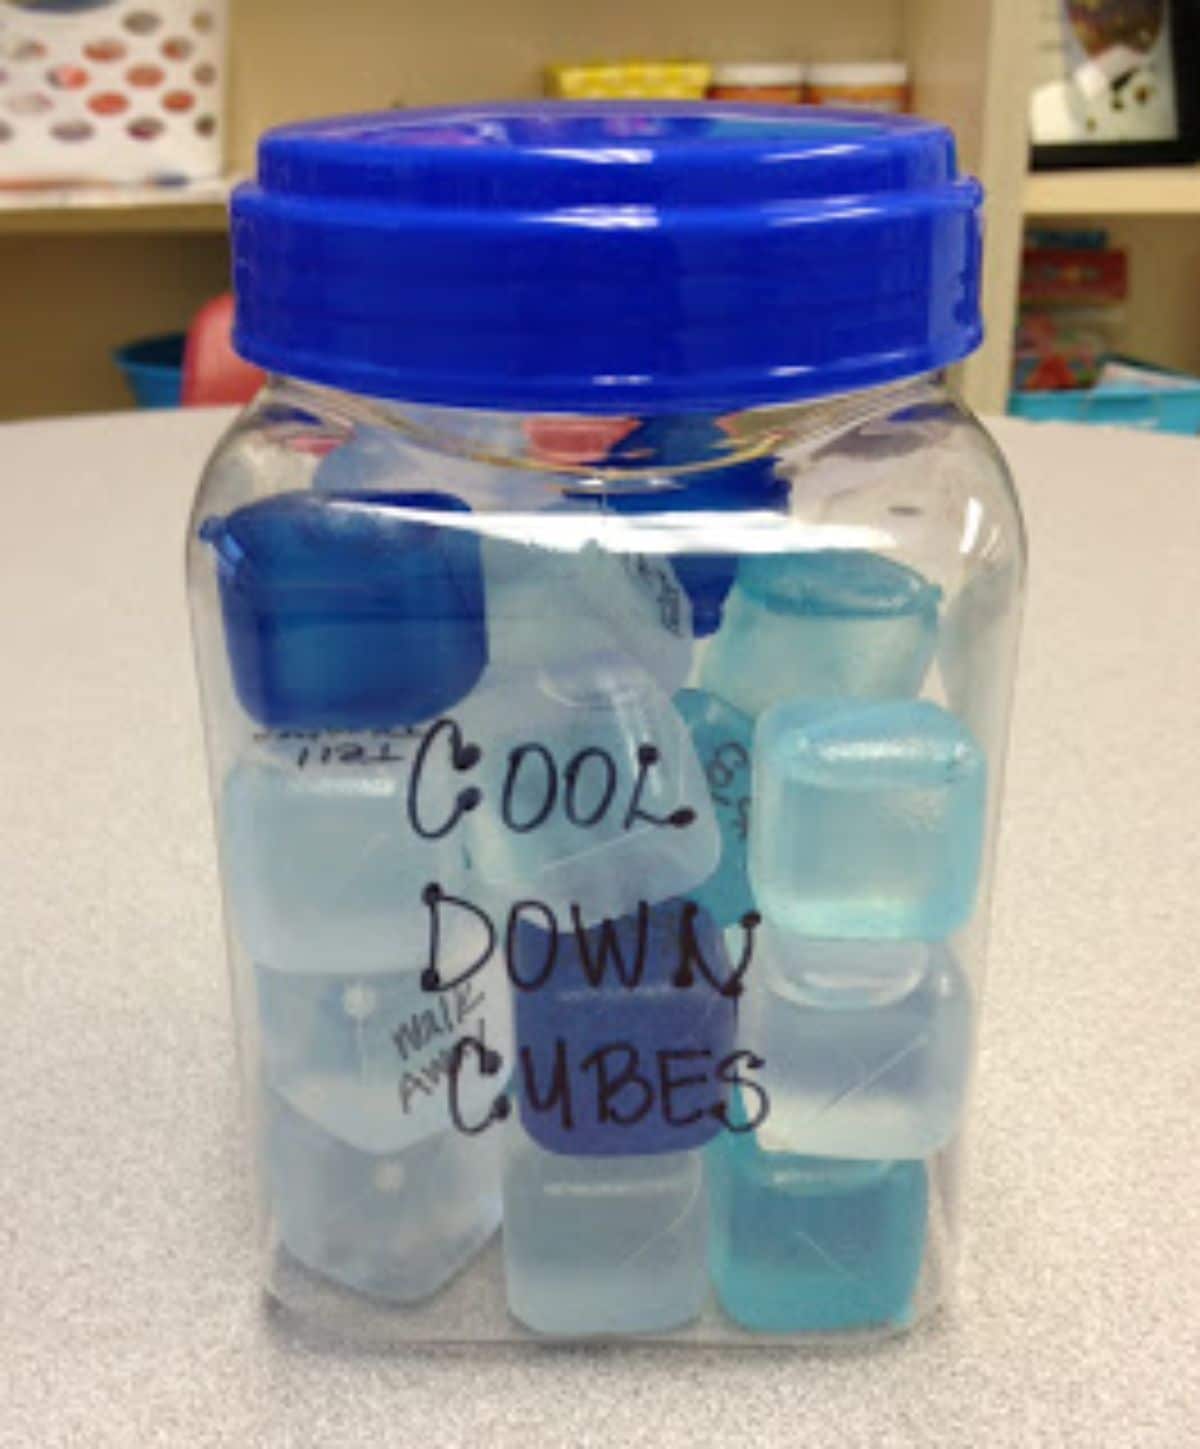 a plastic jar is filled with reusable ice cubes that all have writing on them. The jar is labelled "cool down cubes"